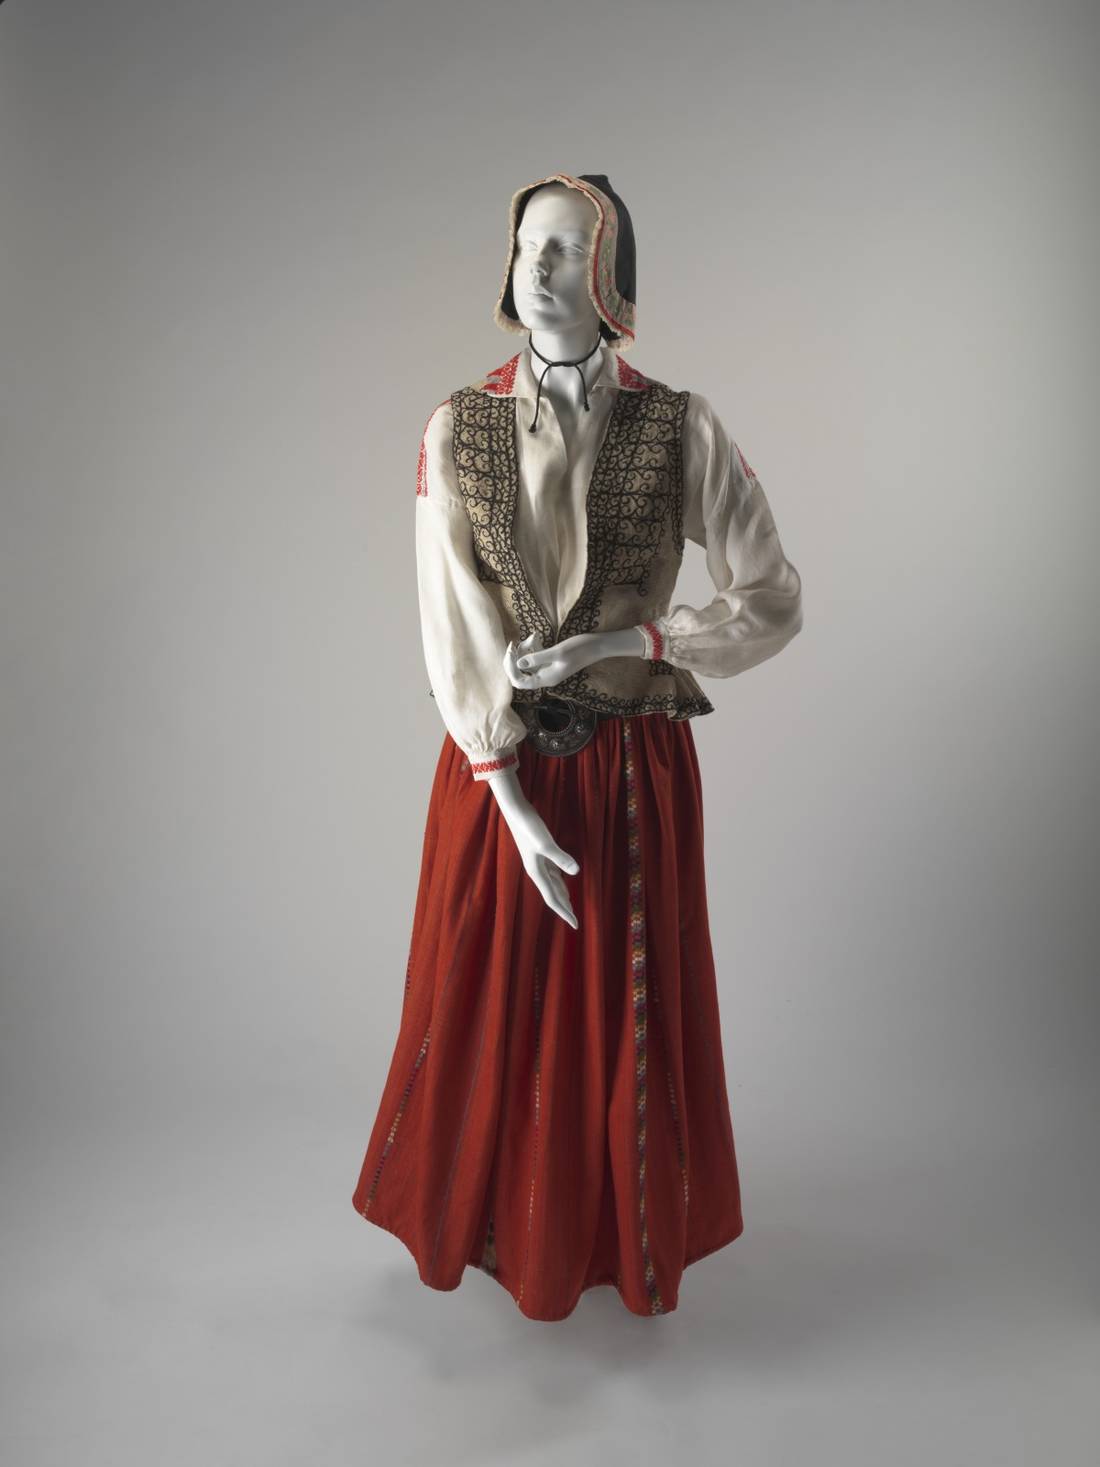 A Latvian woman’s national costume including blouse, waistcoat, skirt, headdress, bonnet and brooches.